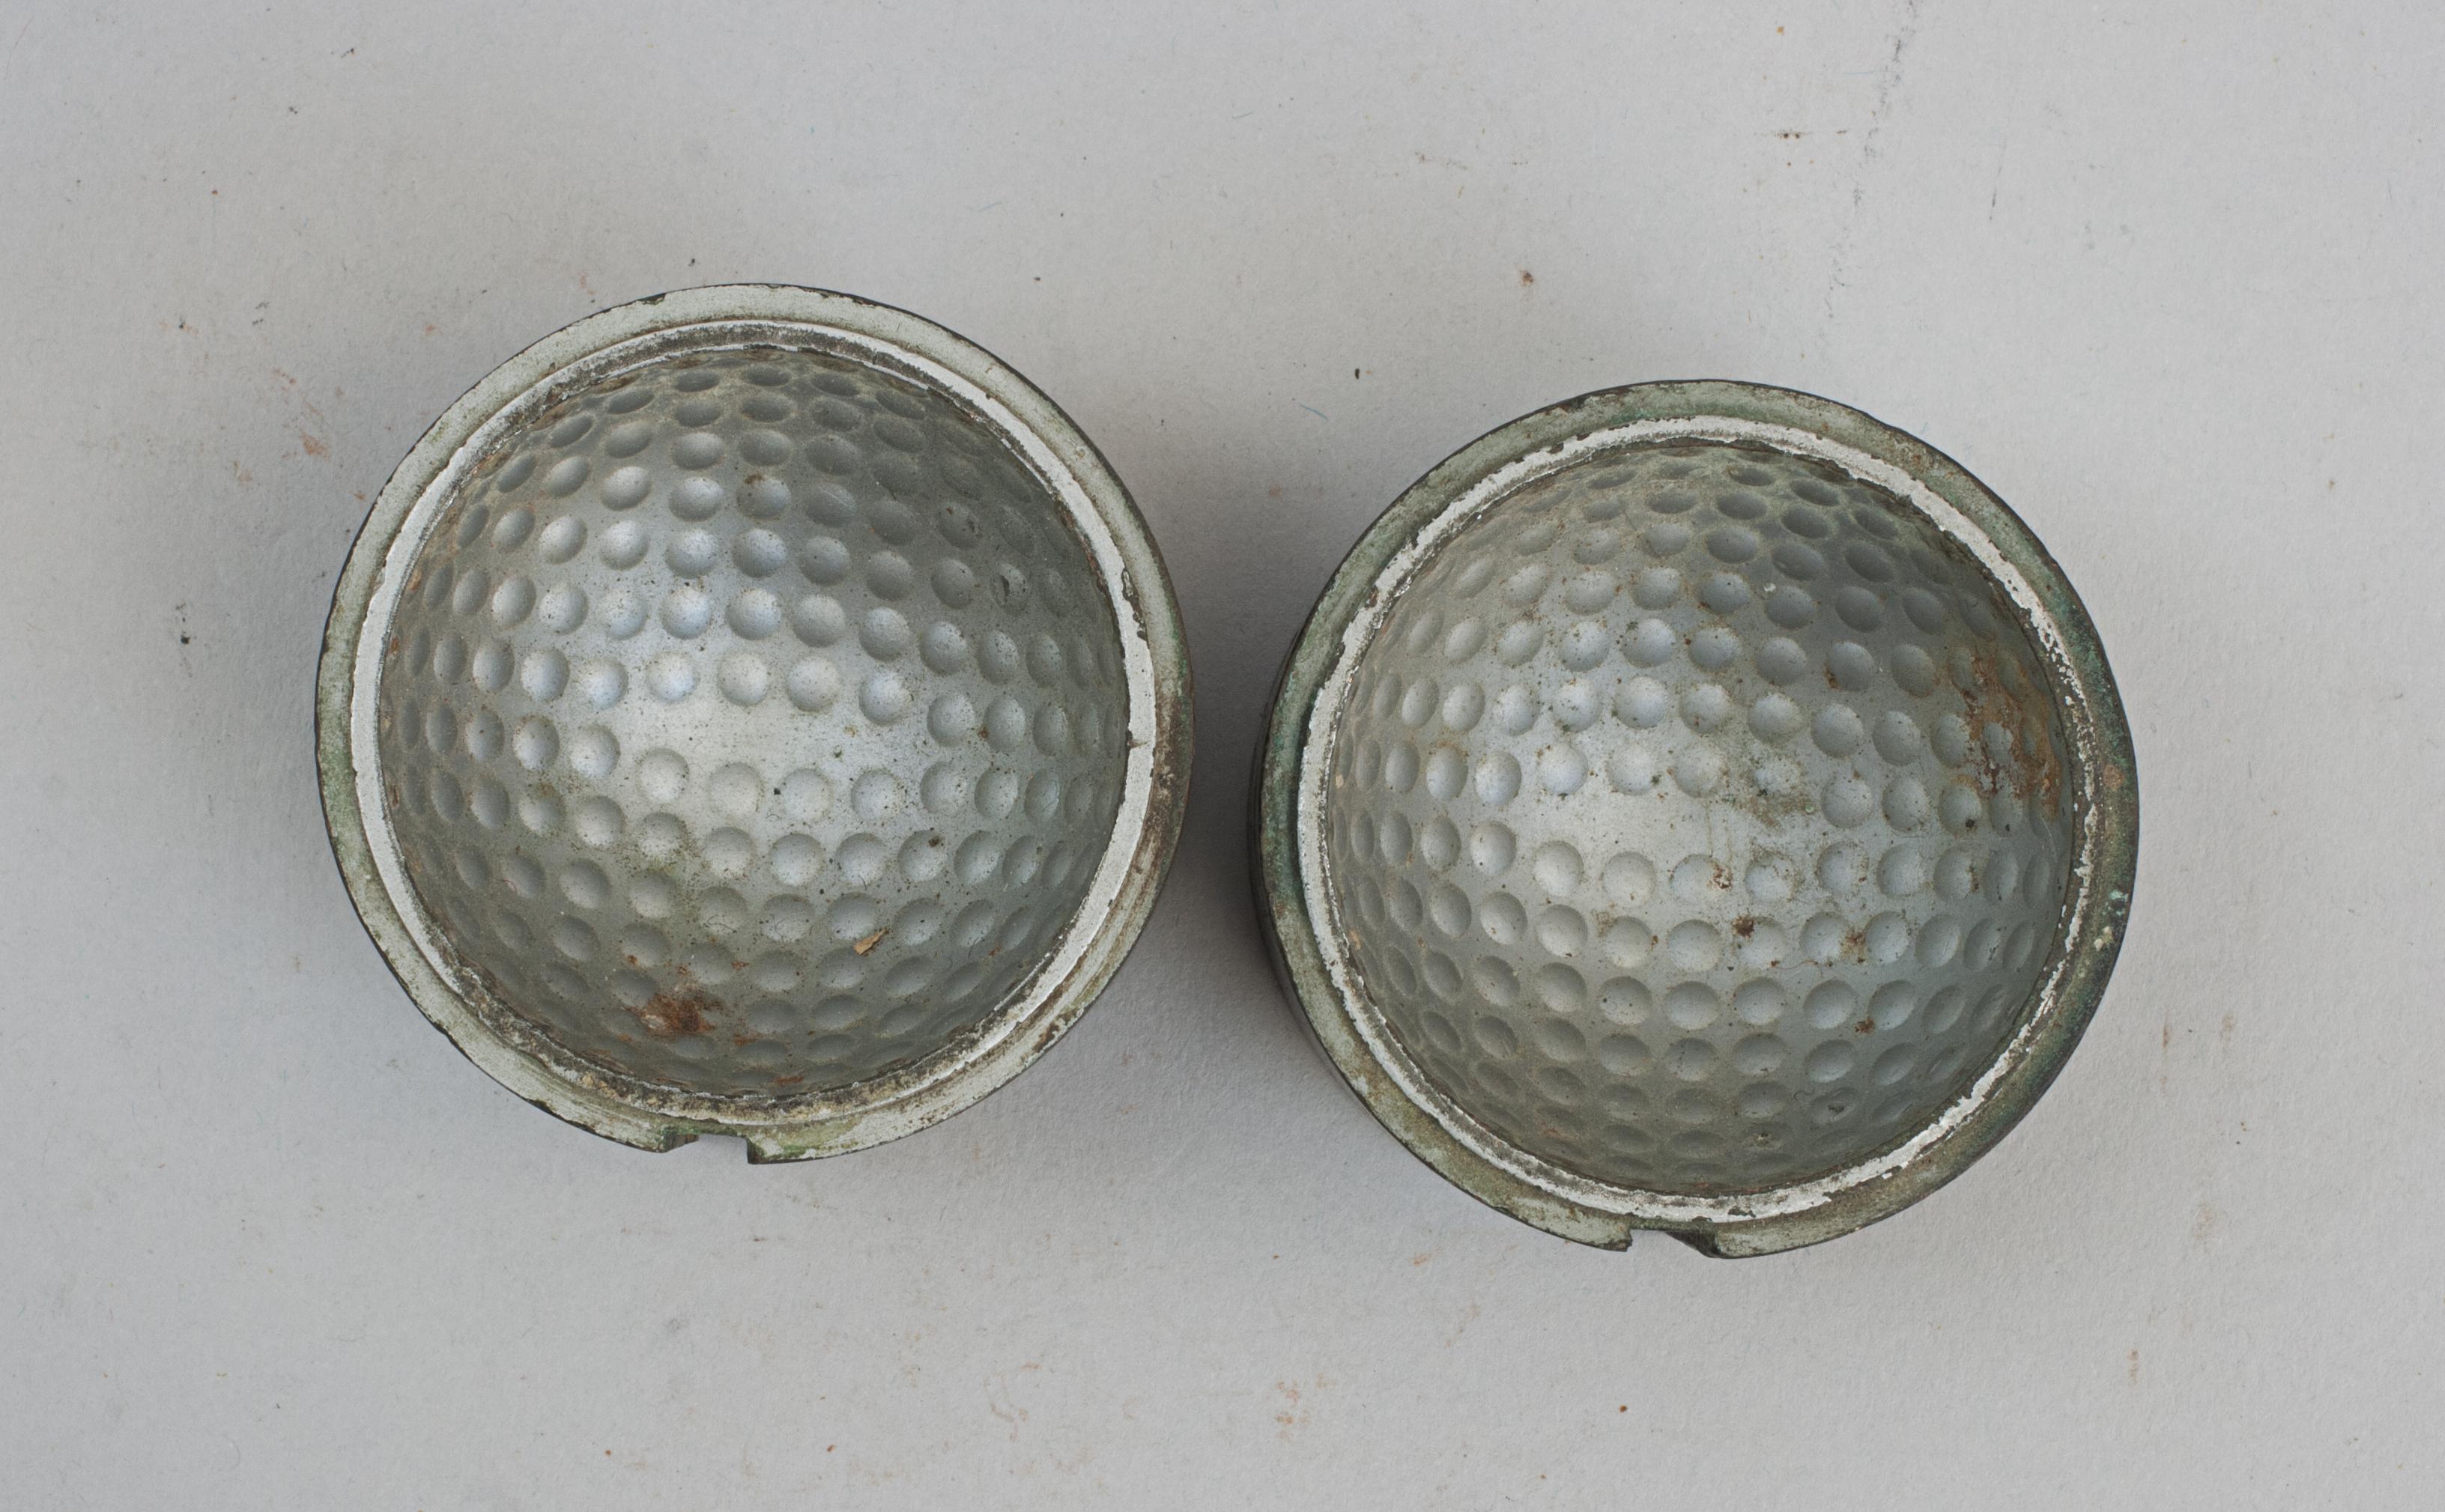 Vintage Two-Part Dimple Golf Ball Mould.
An interesting un-named dimple pattern golf ball mould. The bronze moulds with alloy inner with locating slots on the side to ensure the correct alignment of the pattern. One part stamped 'B 18, 4 - 75, Made